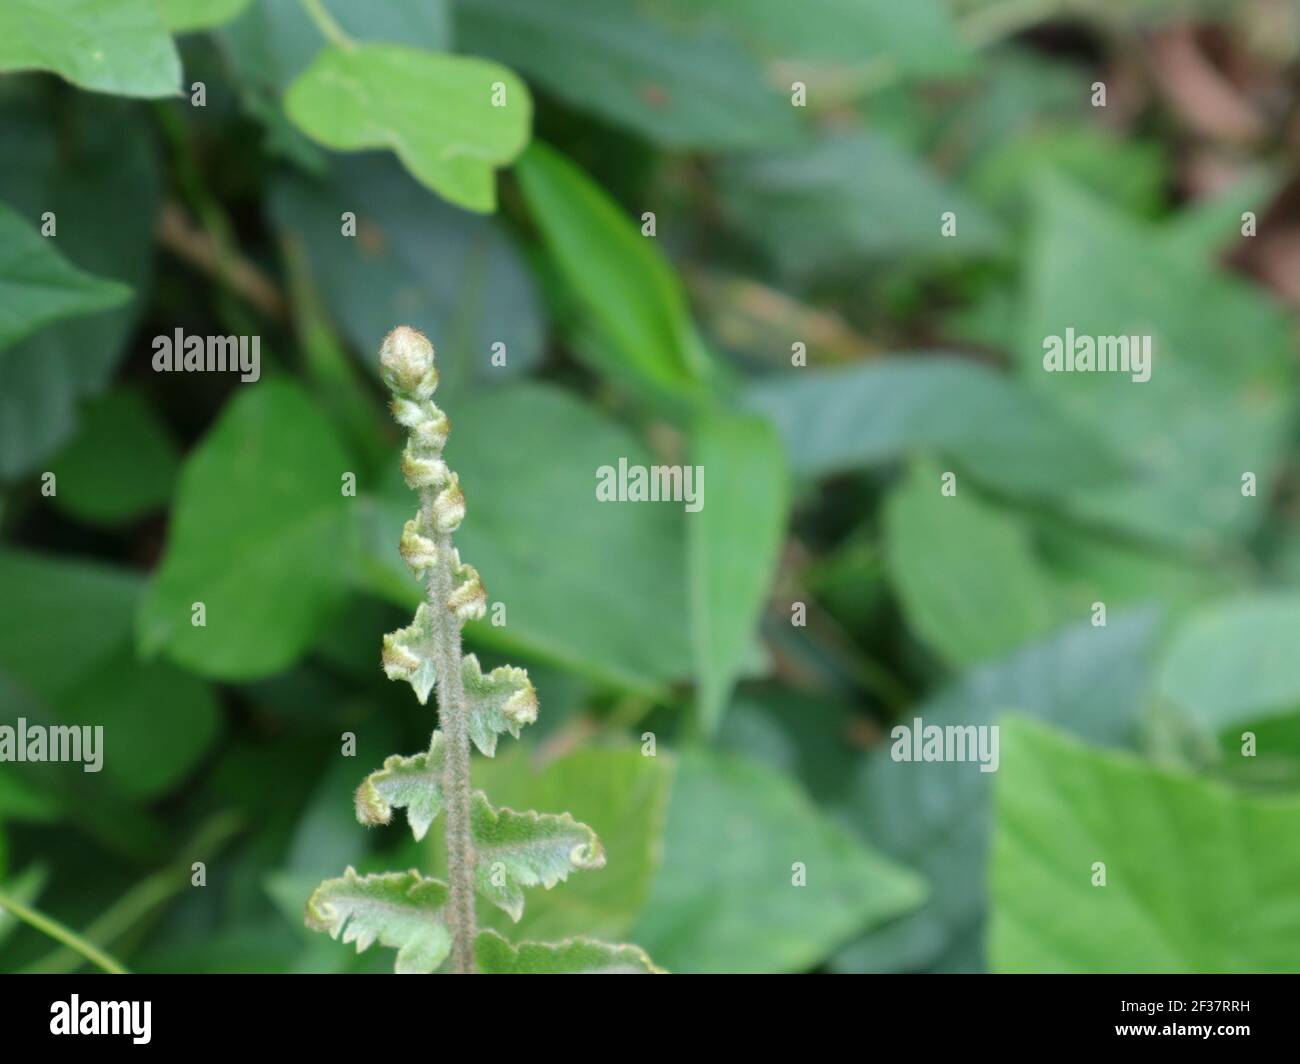 Selective focus on tip of a hairy frond Stock Photo